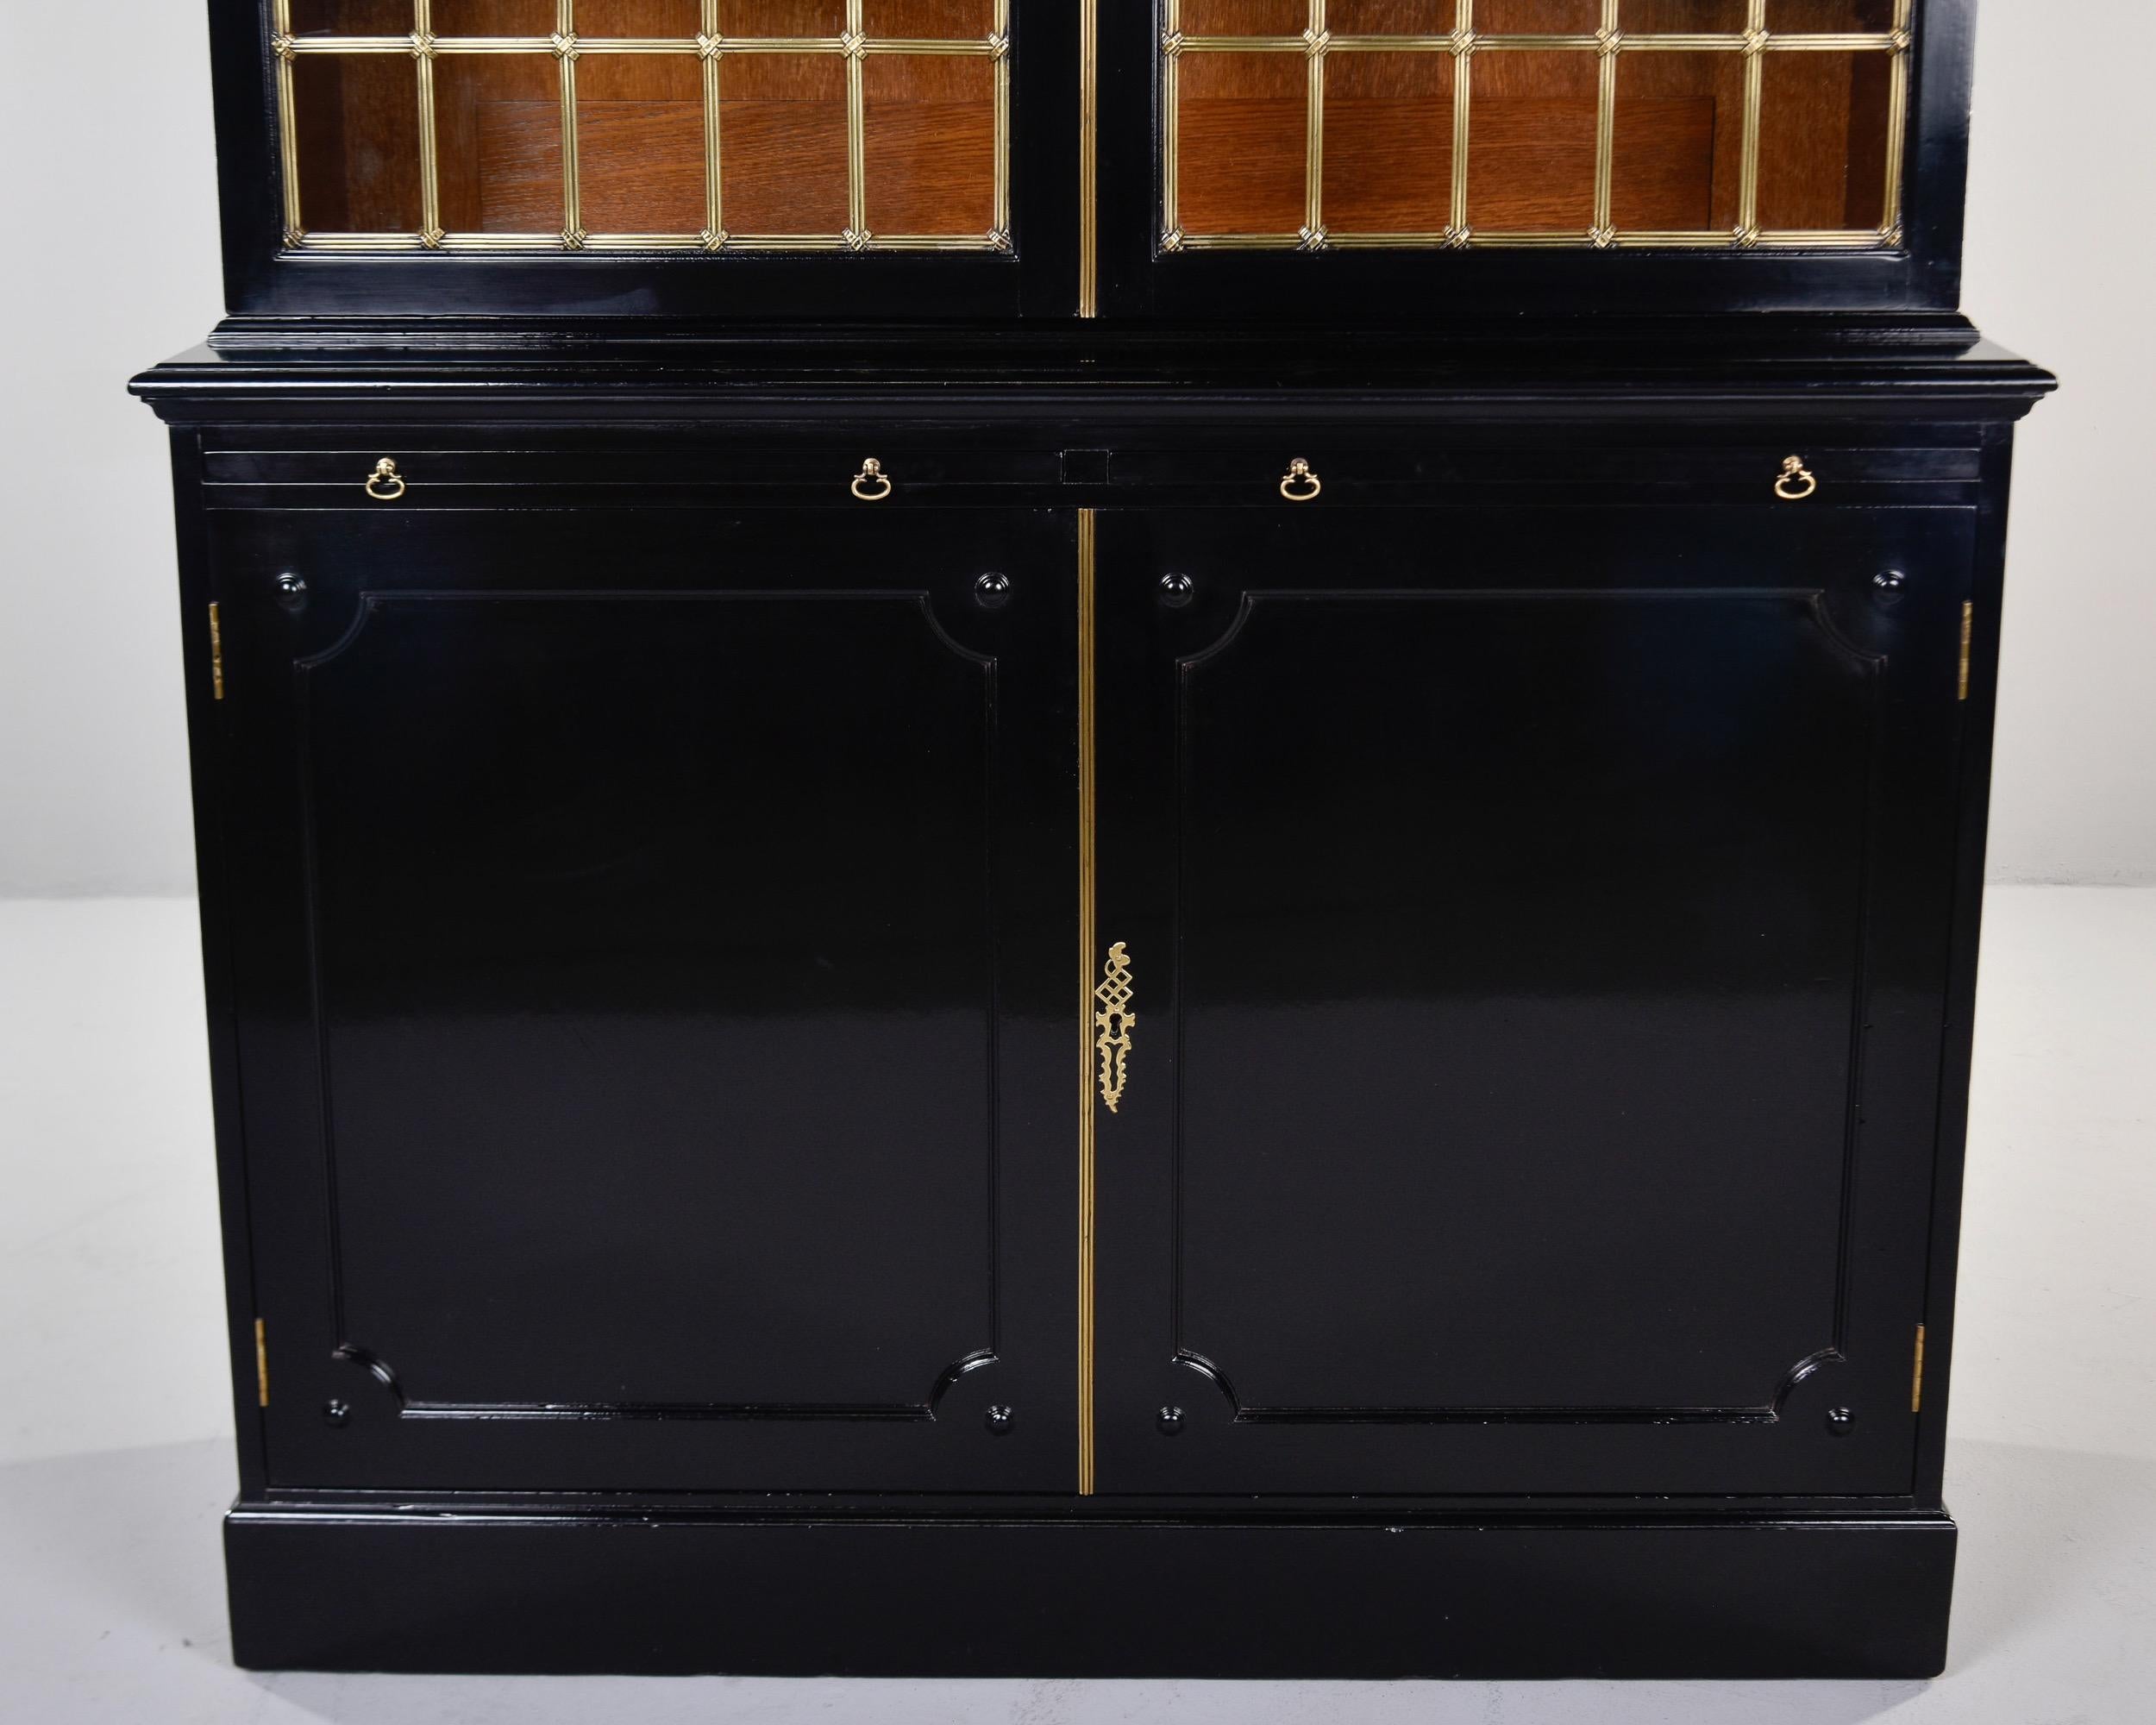 Early 20th C English Ebonised Mahogany Bookcase with Brass Grill & Leaded Glass For Sale 4